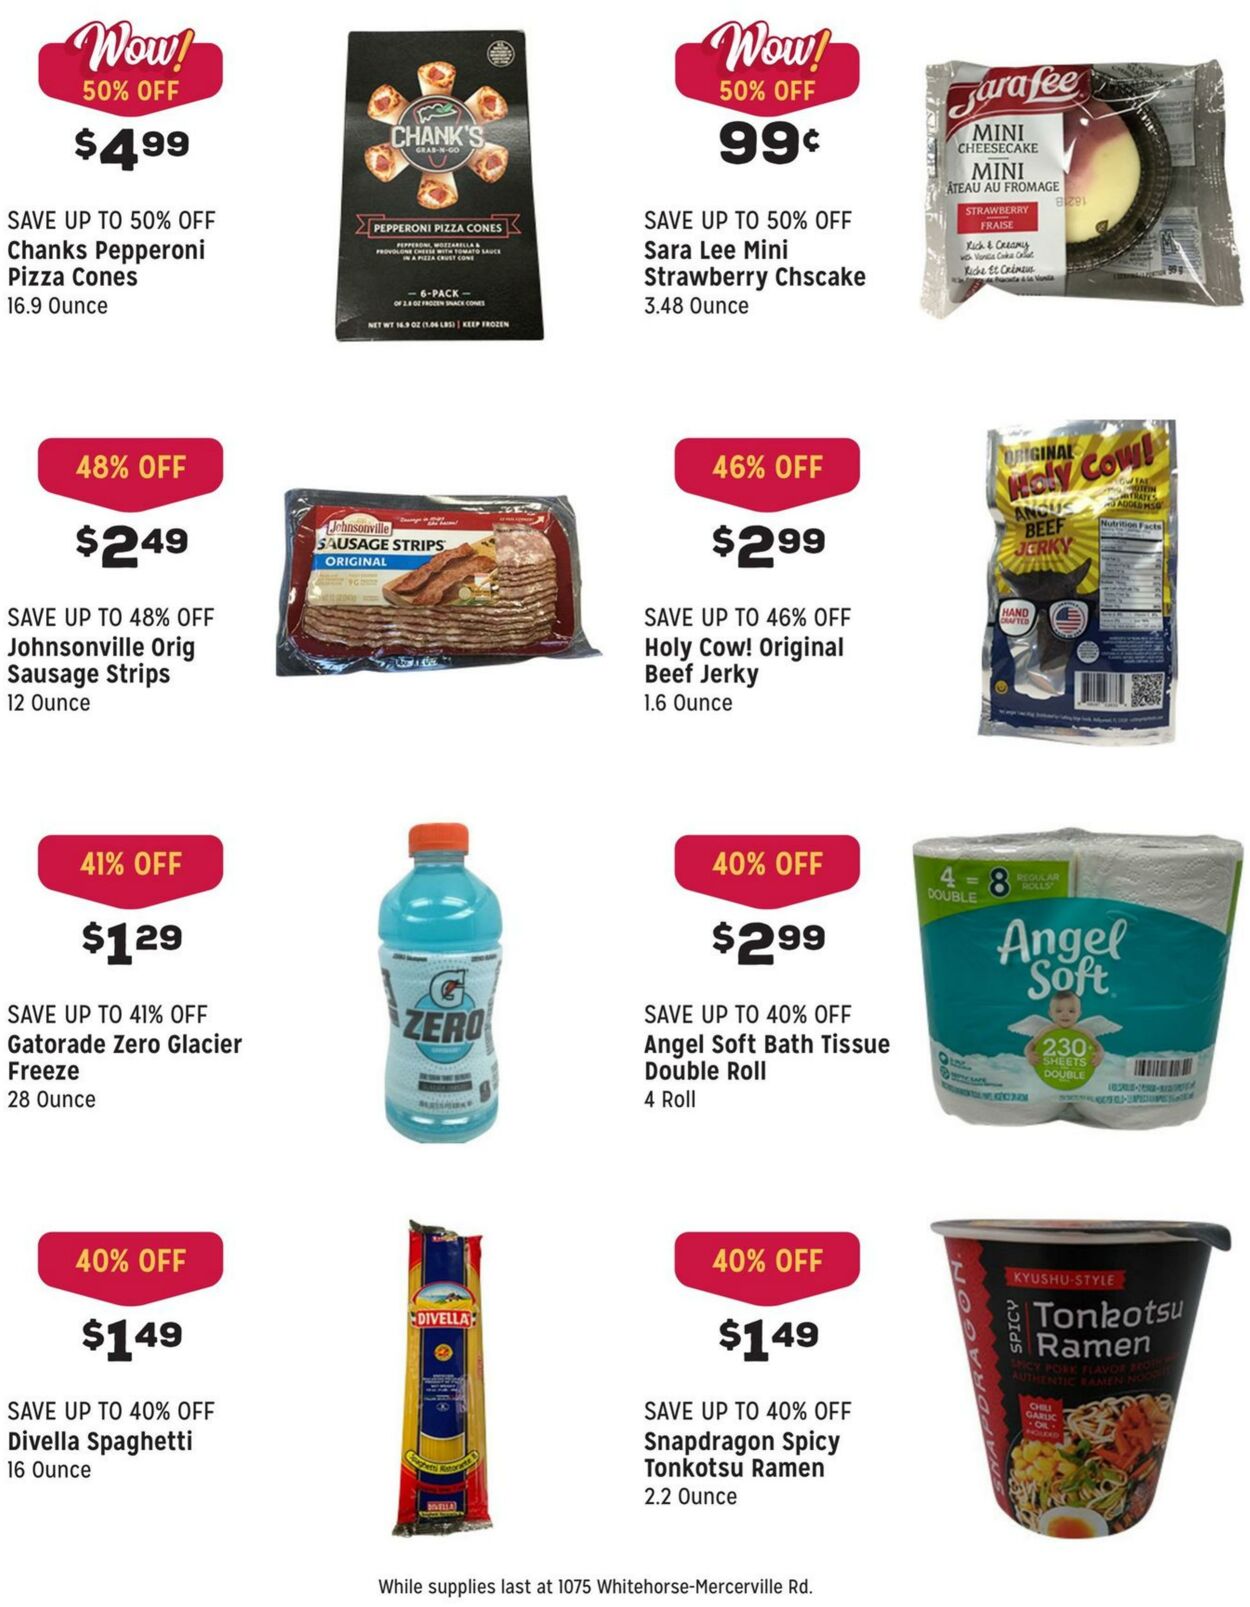 Weekly ad Grocery Outlet 11/23/2022 - 11/29/2022